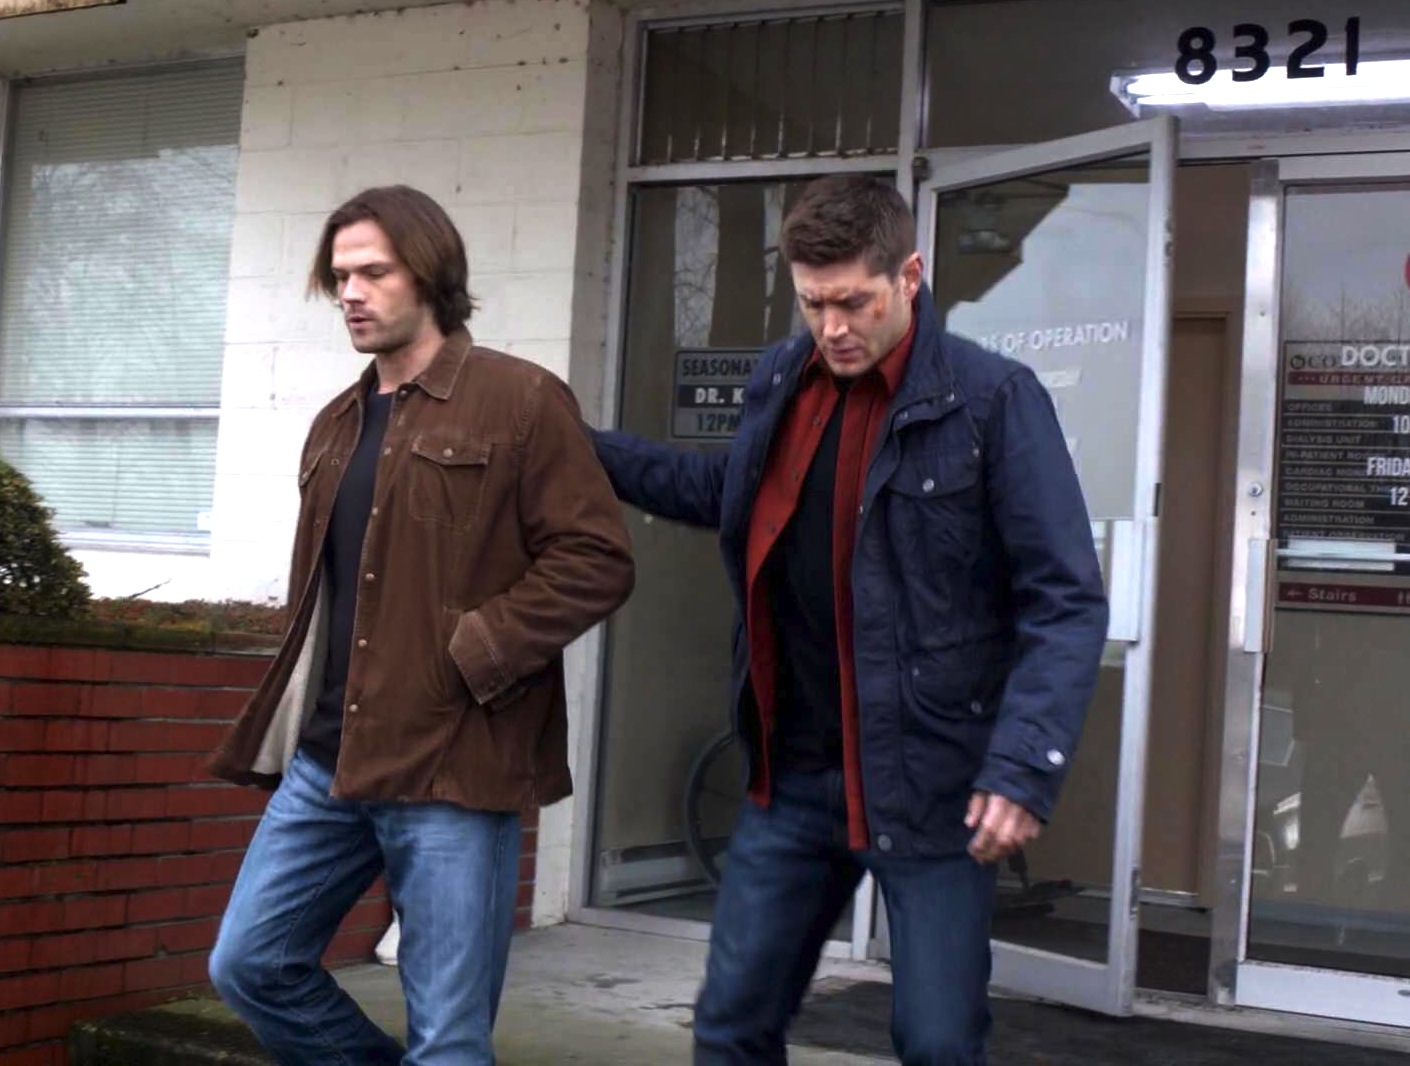 sweetondean: Review: Supernatural Meat" - The Agony and the Ecstasy Loving Sam and Dean